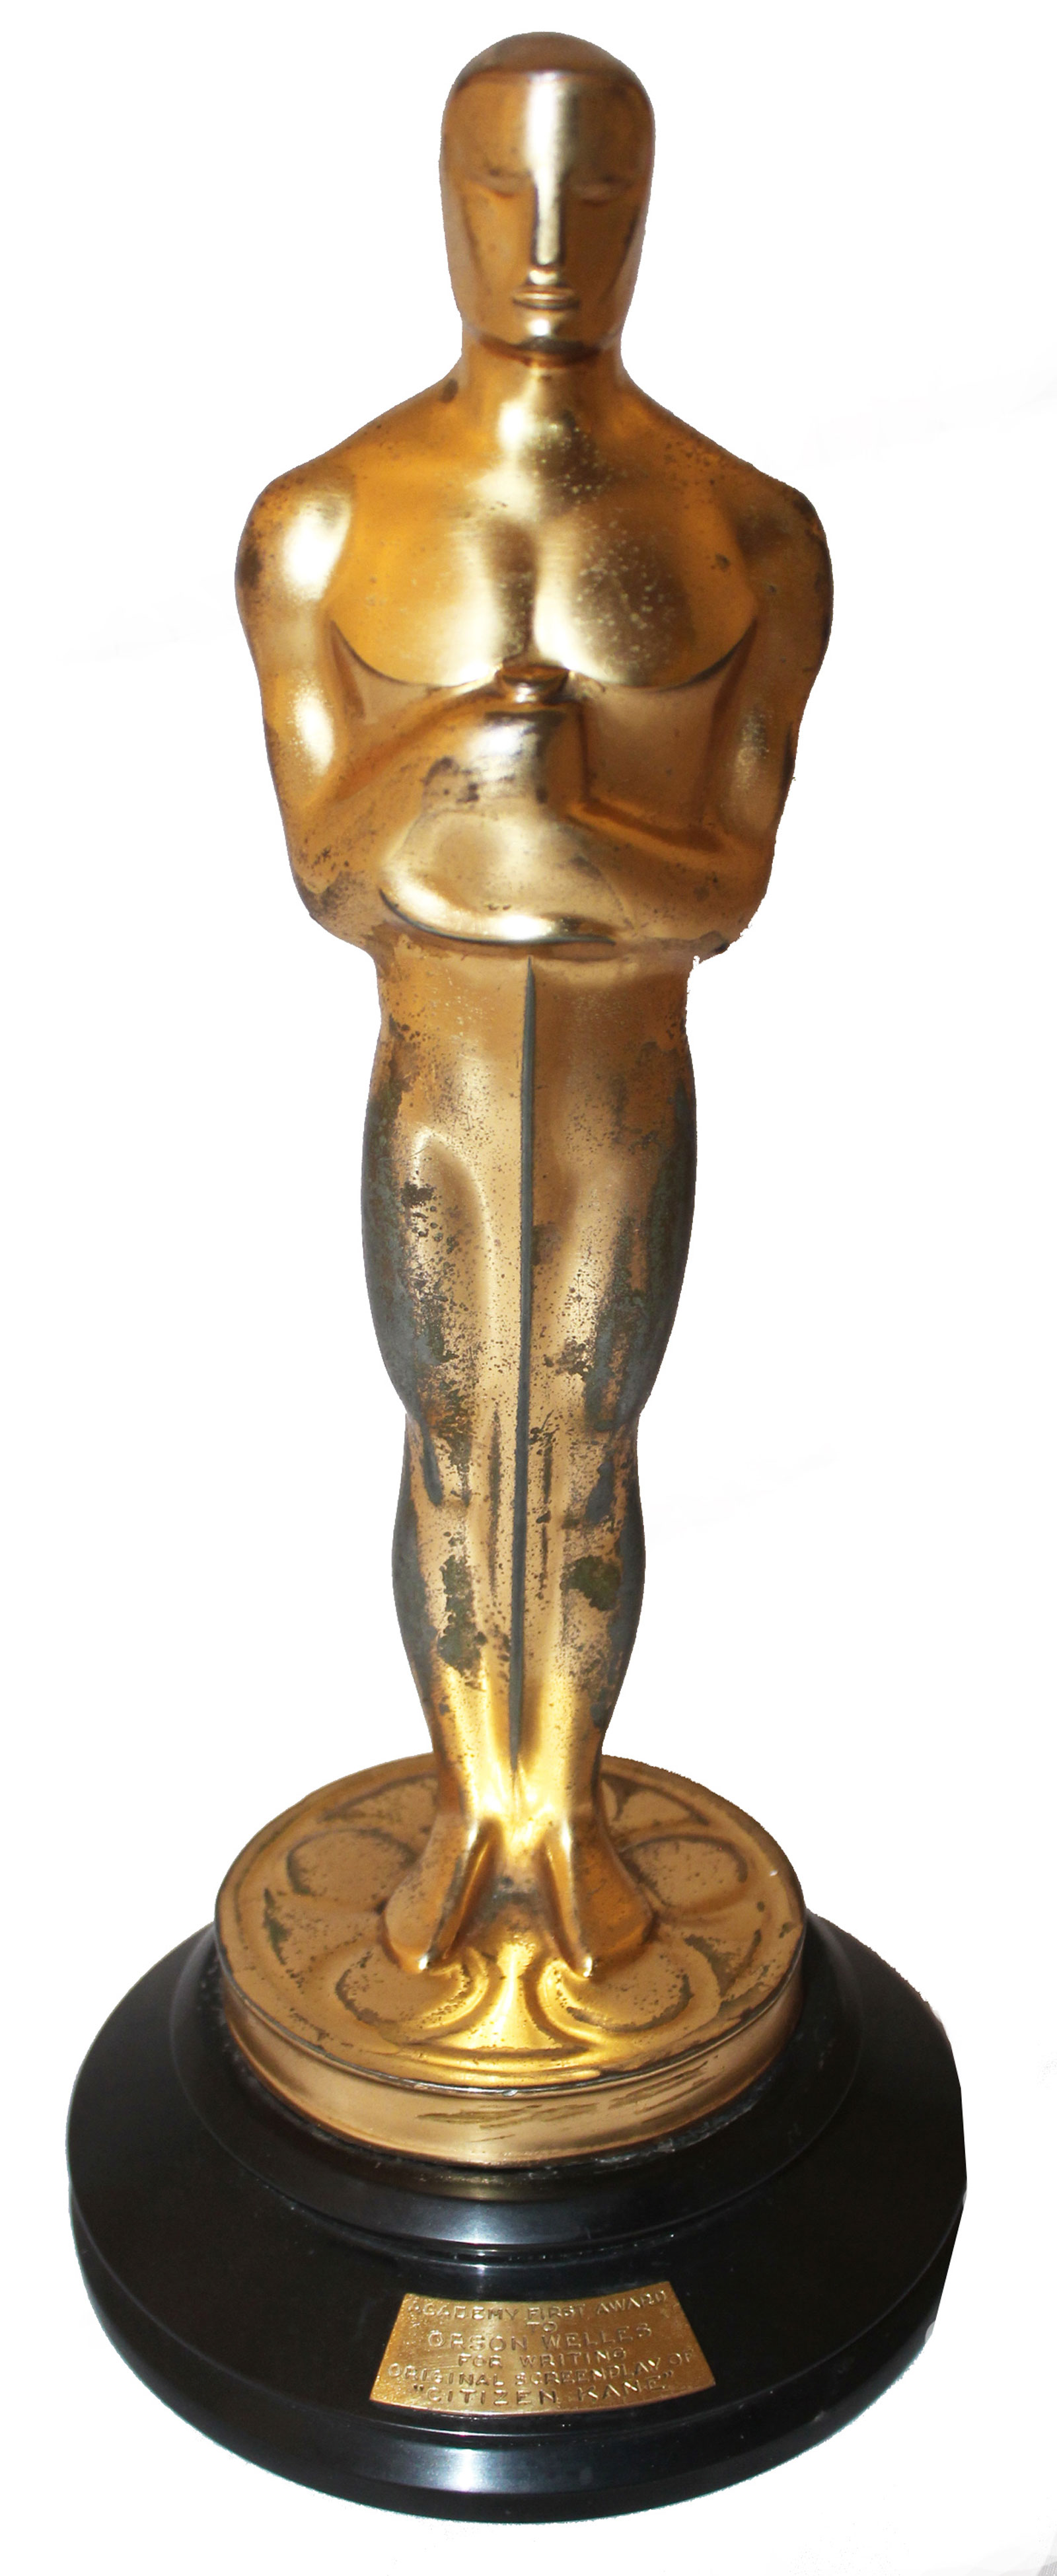 The Gold Plated Oscar Statue Awarded To Orson Welles For Best Original